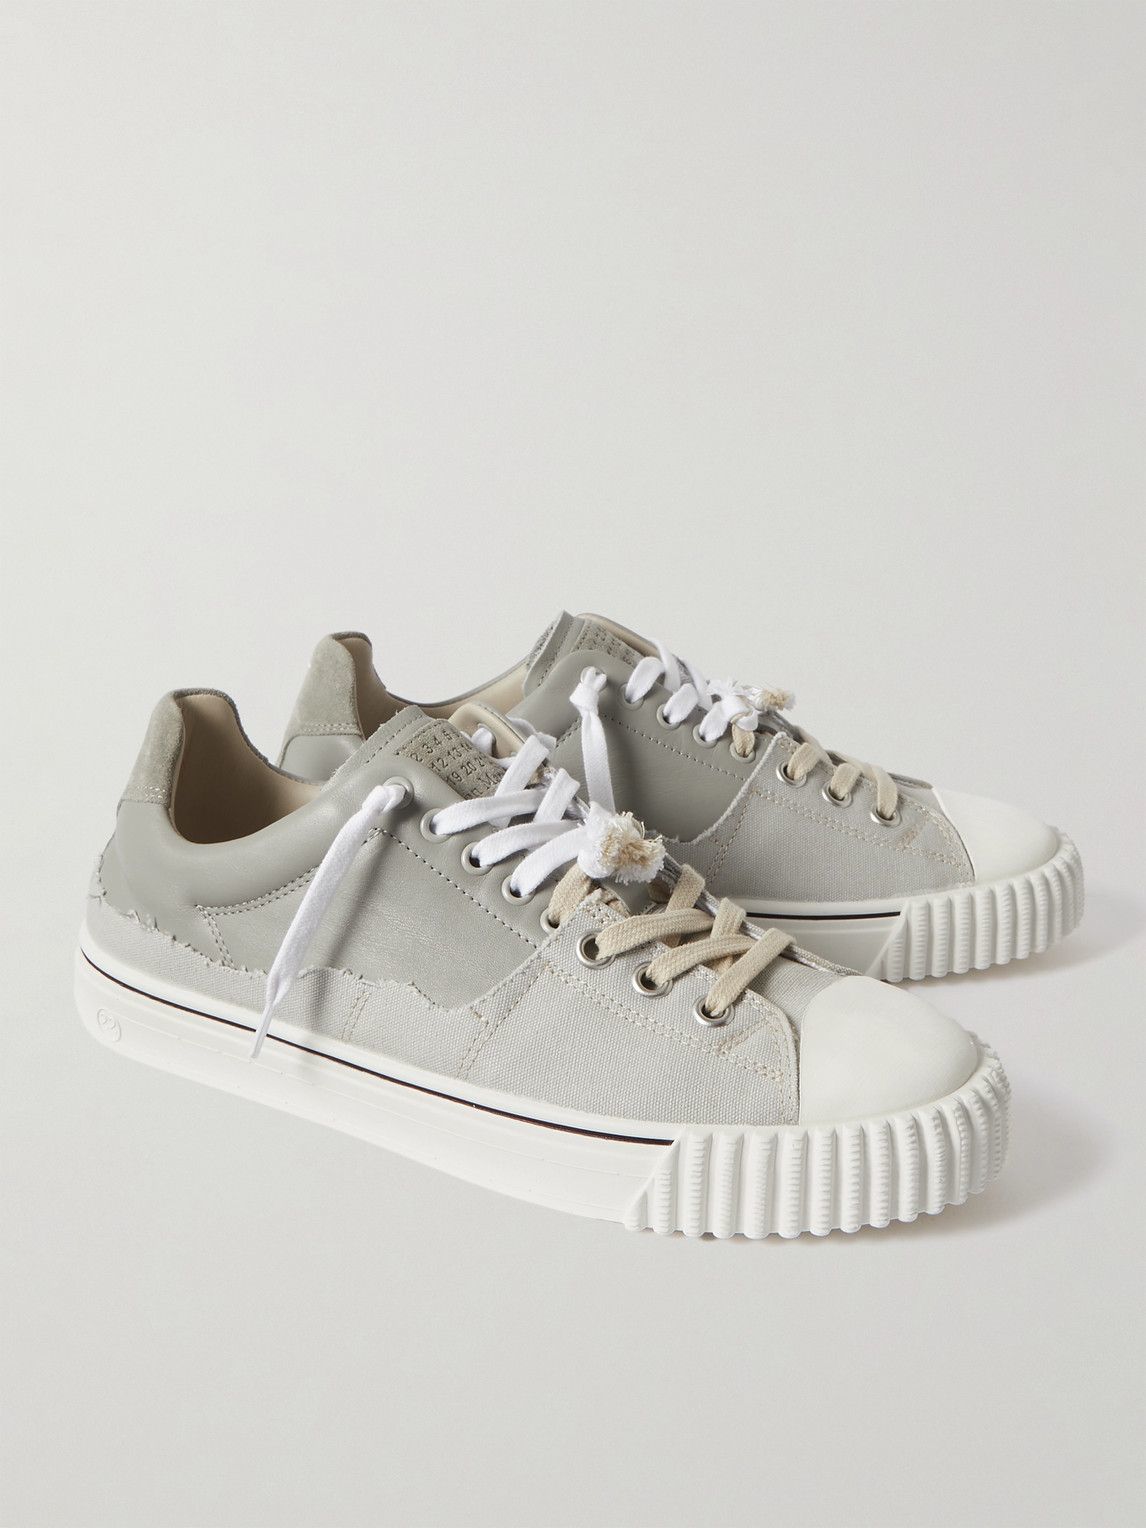 Maison Margiela - Evolution Distressed Canvas and Leather Sneakers ...